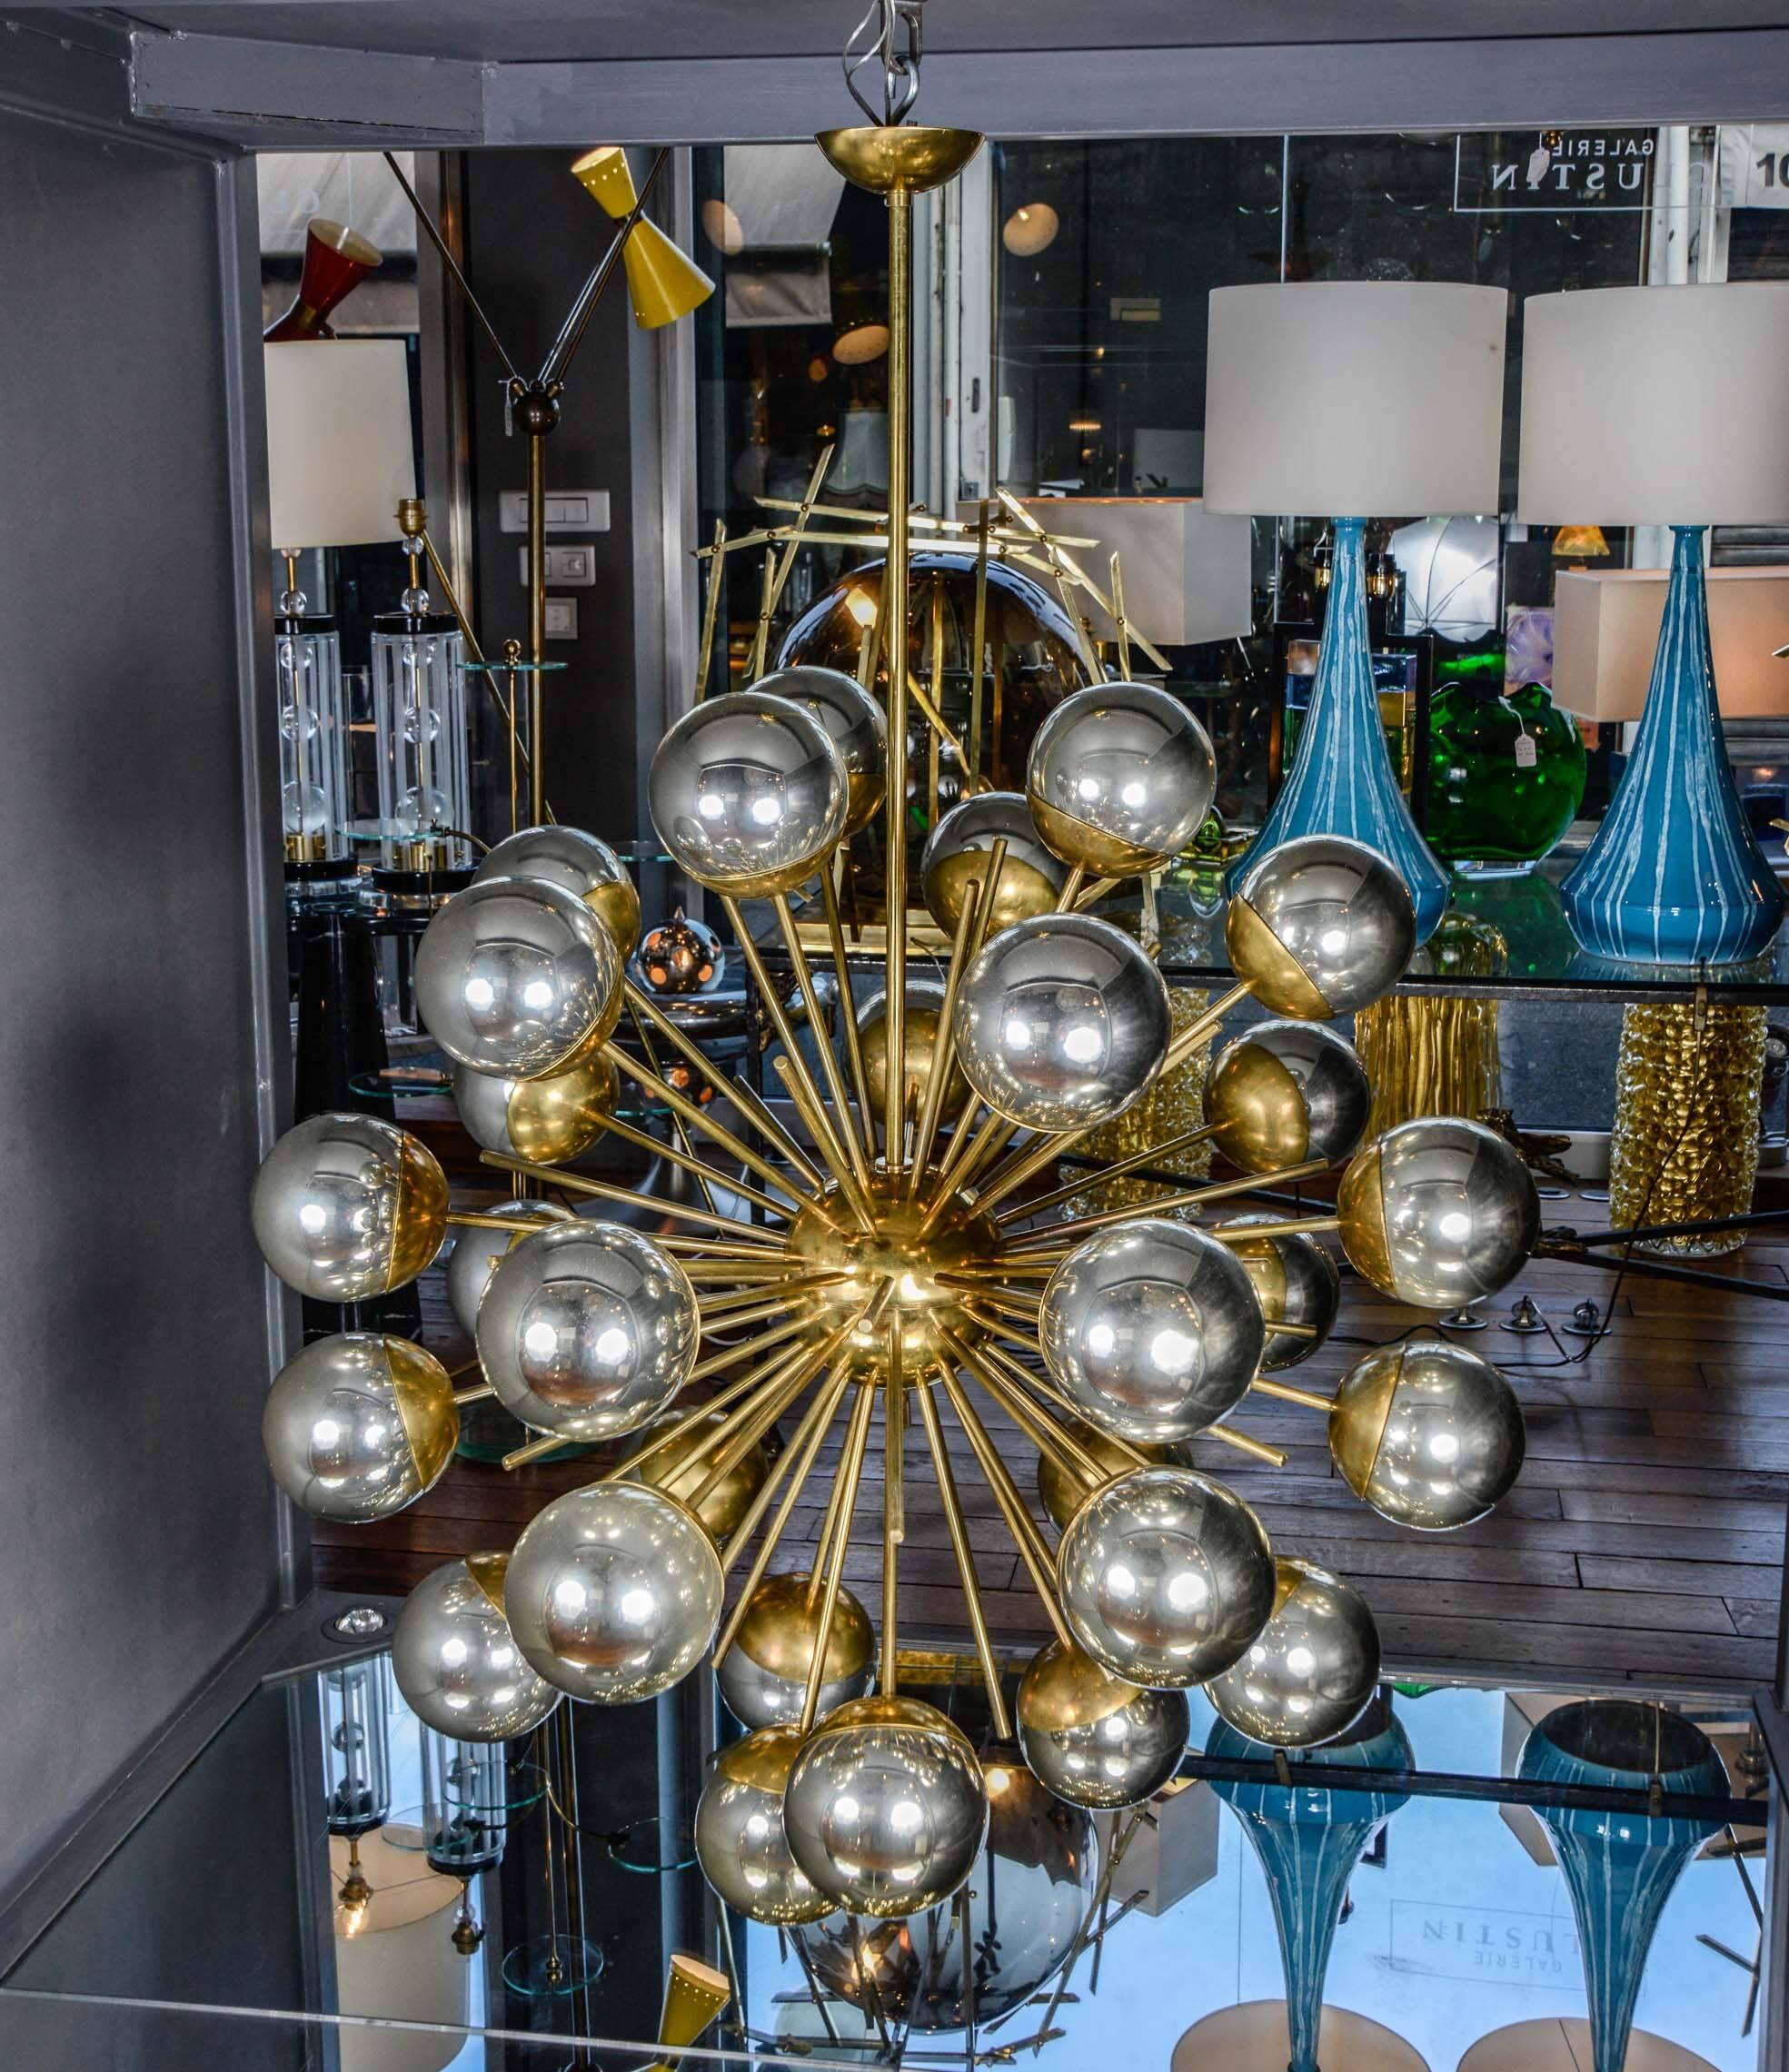 Pair of chandeliers made of brass structure with decorative rods and arms of light, each capped by a chrome-tinted, Murano glass globe.